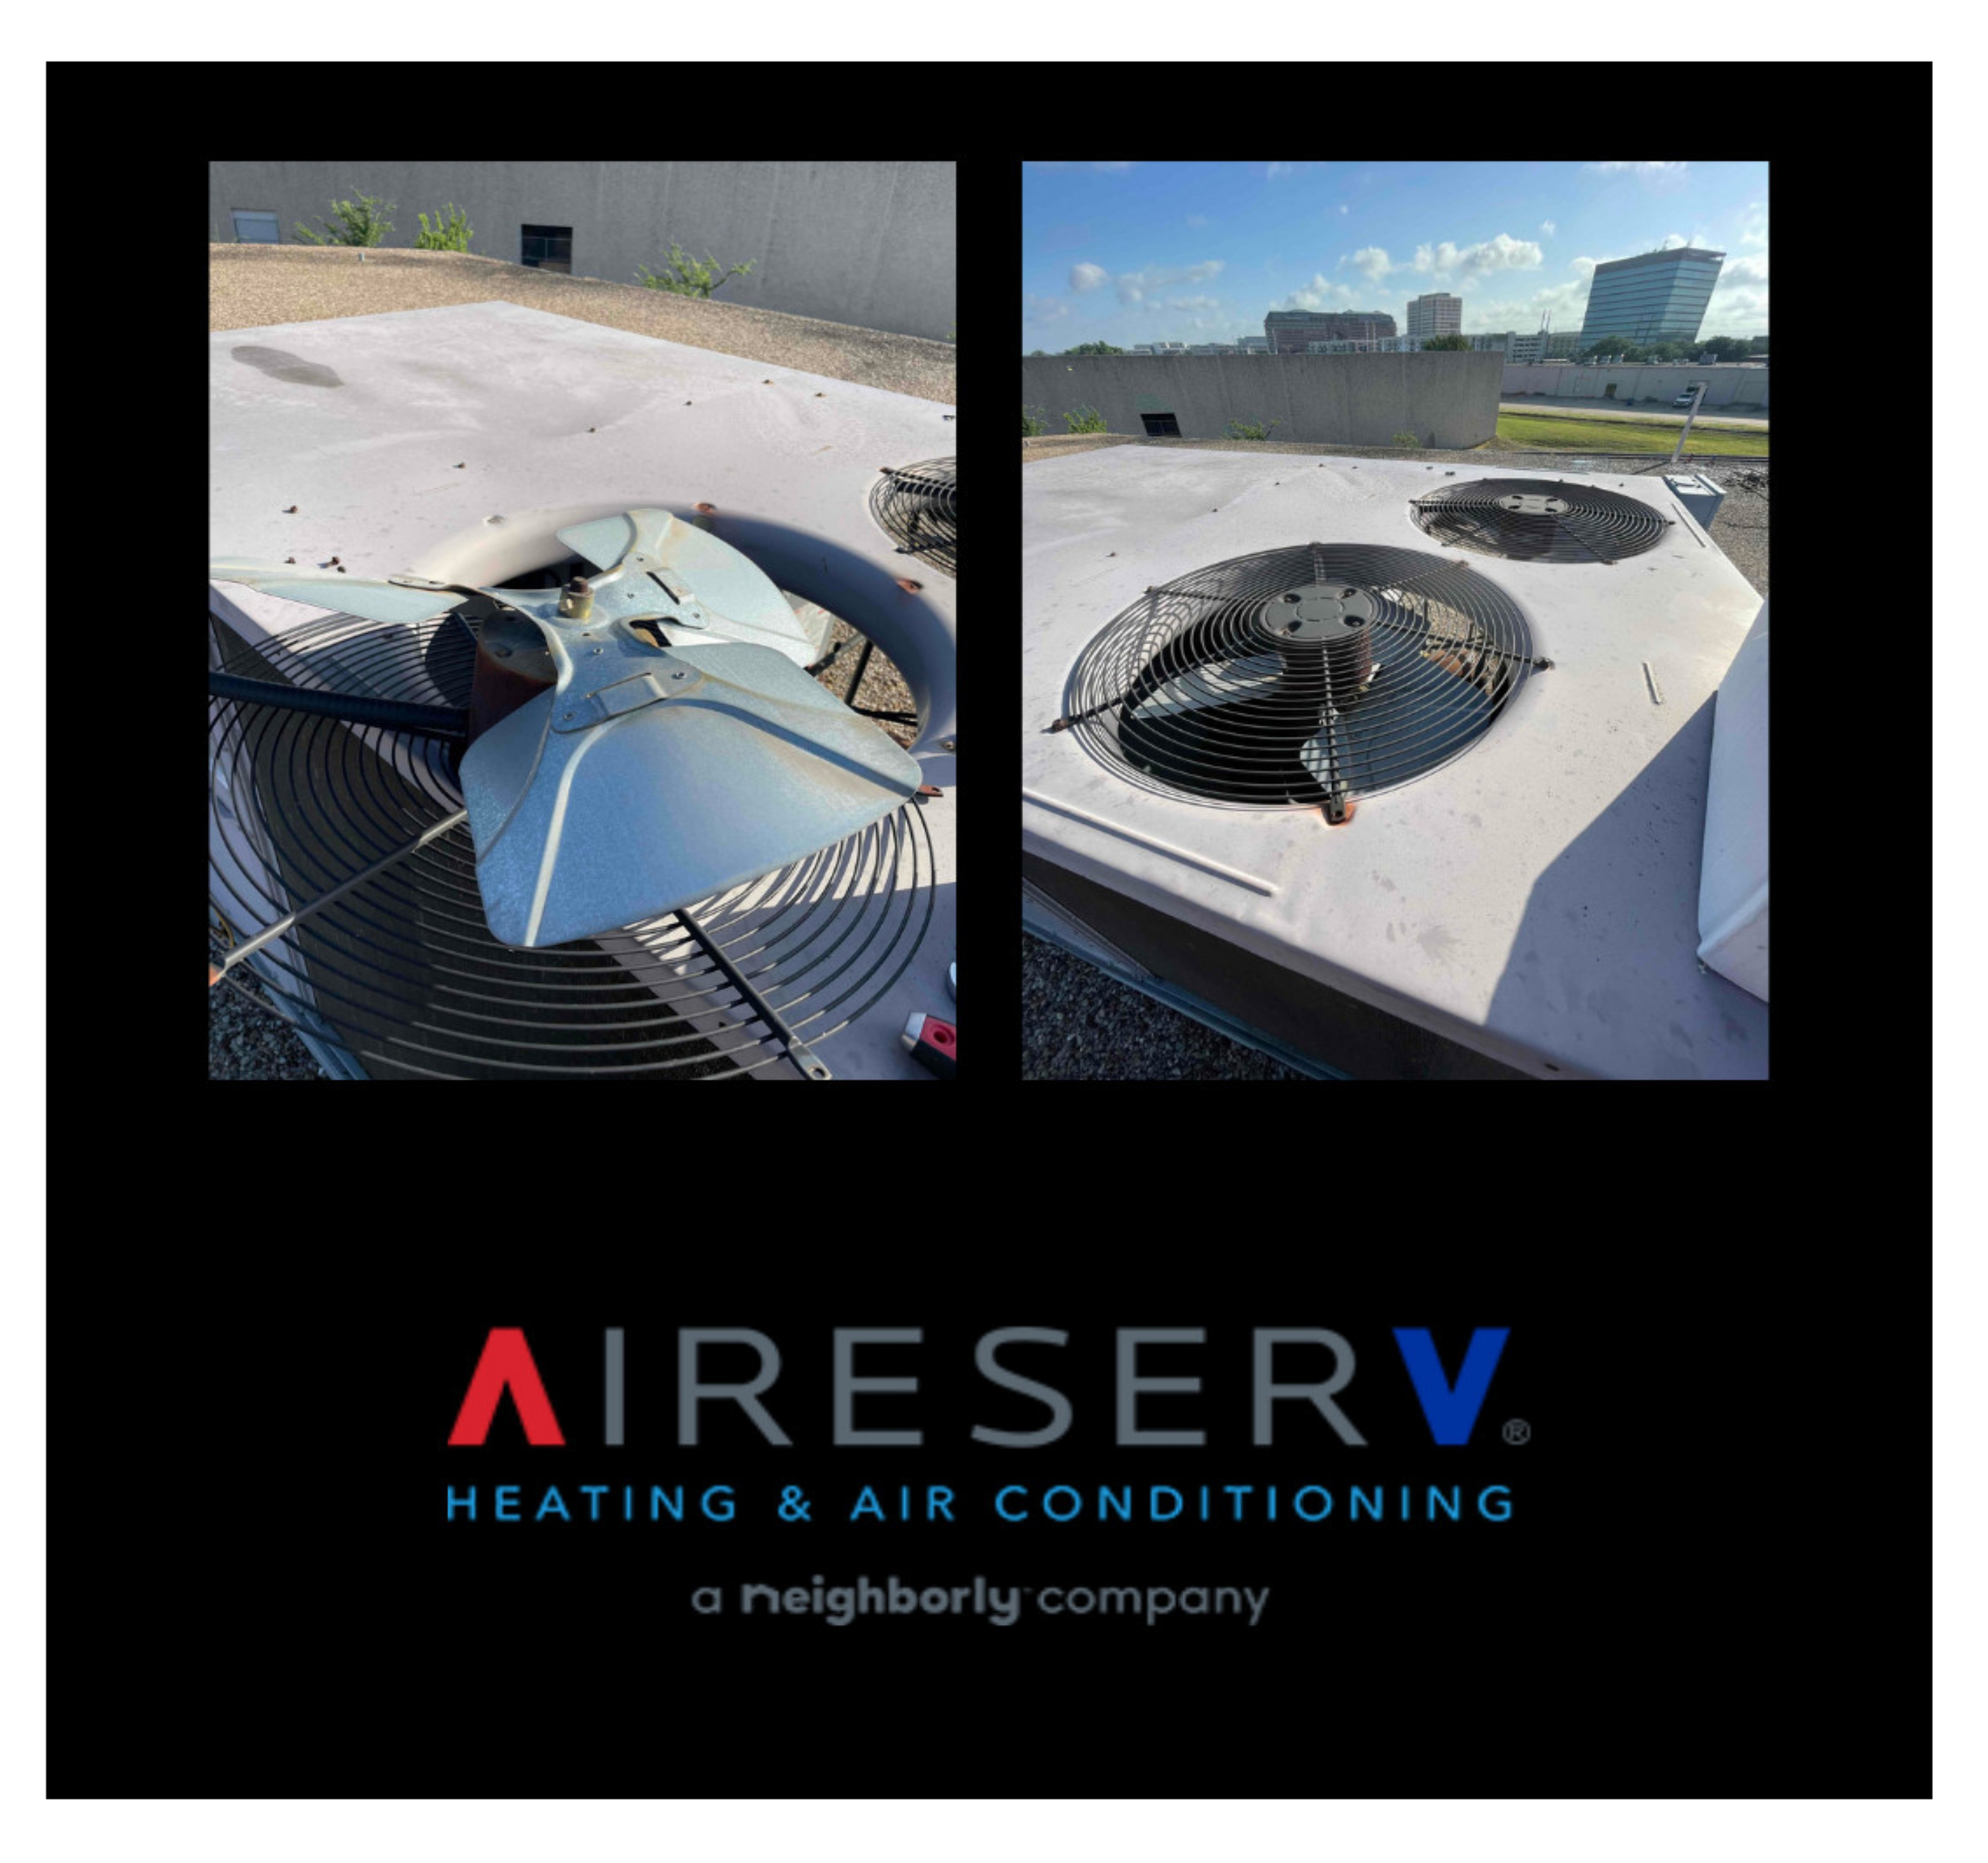 A commercial condenser fan on the roof of a building before and after new fan blades have been installed by Aire Serv.